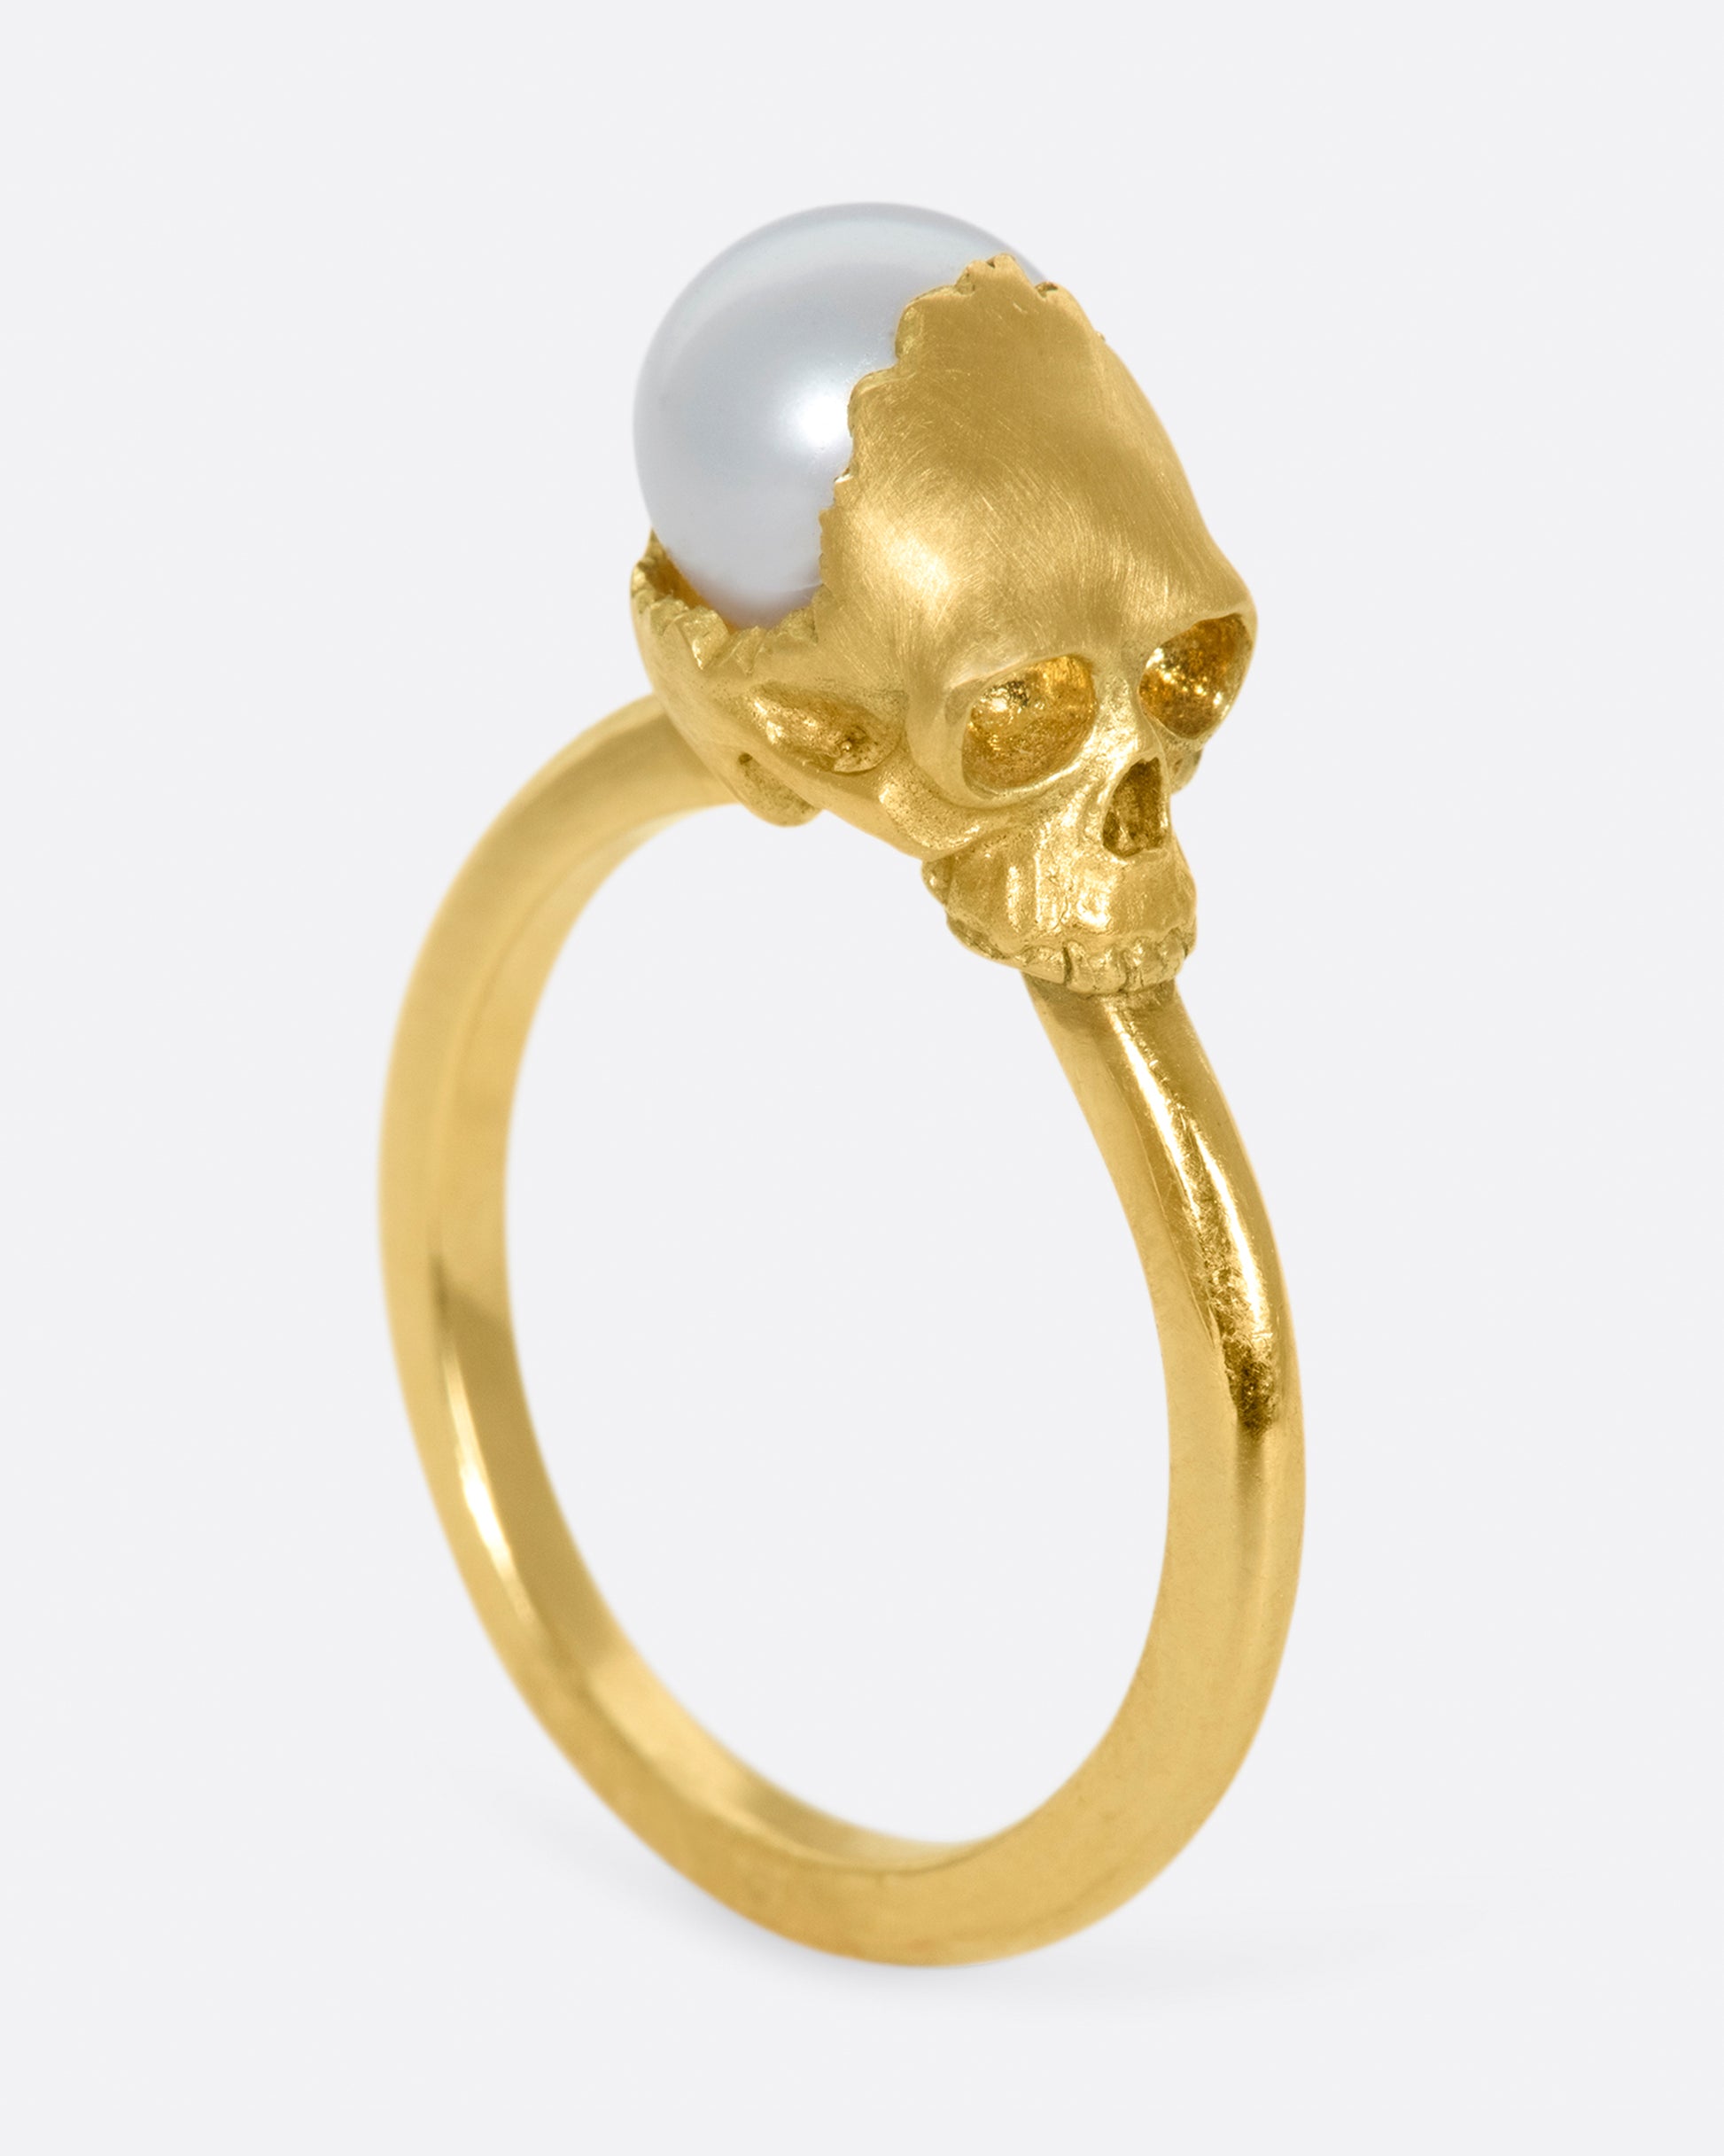 Based on the anatomical sketches of Leonardo da Vinci, this skull ring is very realistic and crowned with a freshwater pearl.